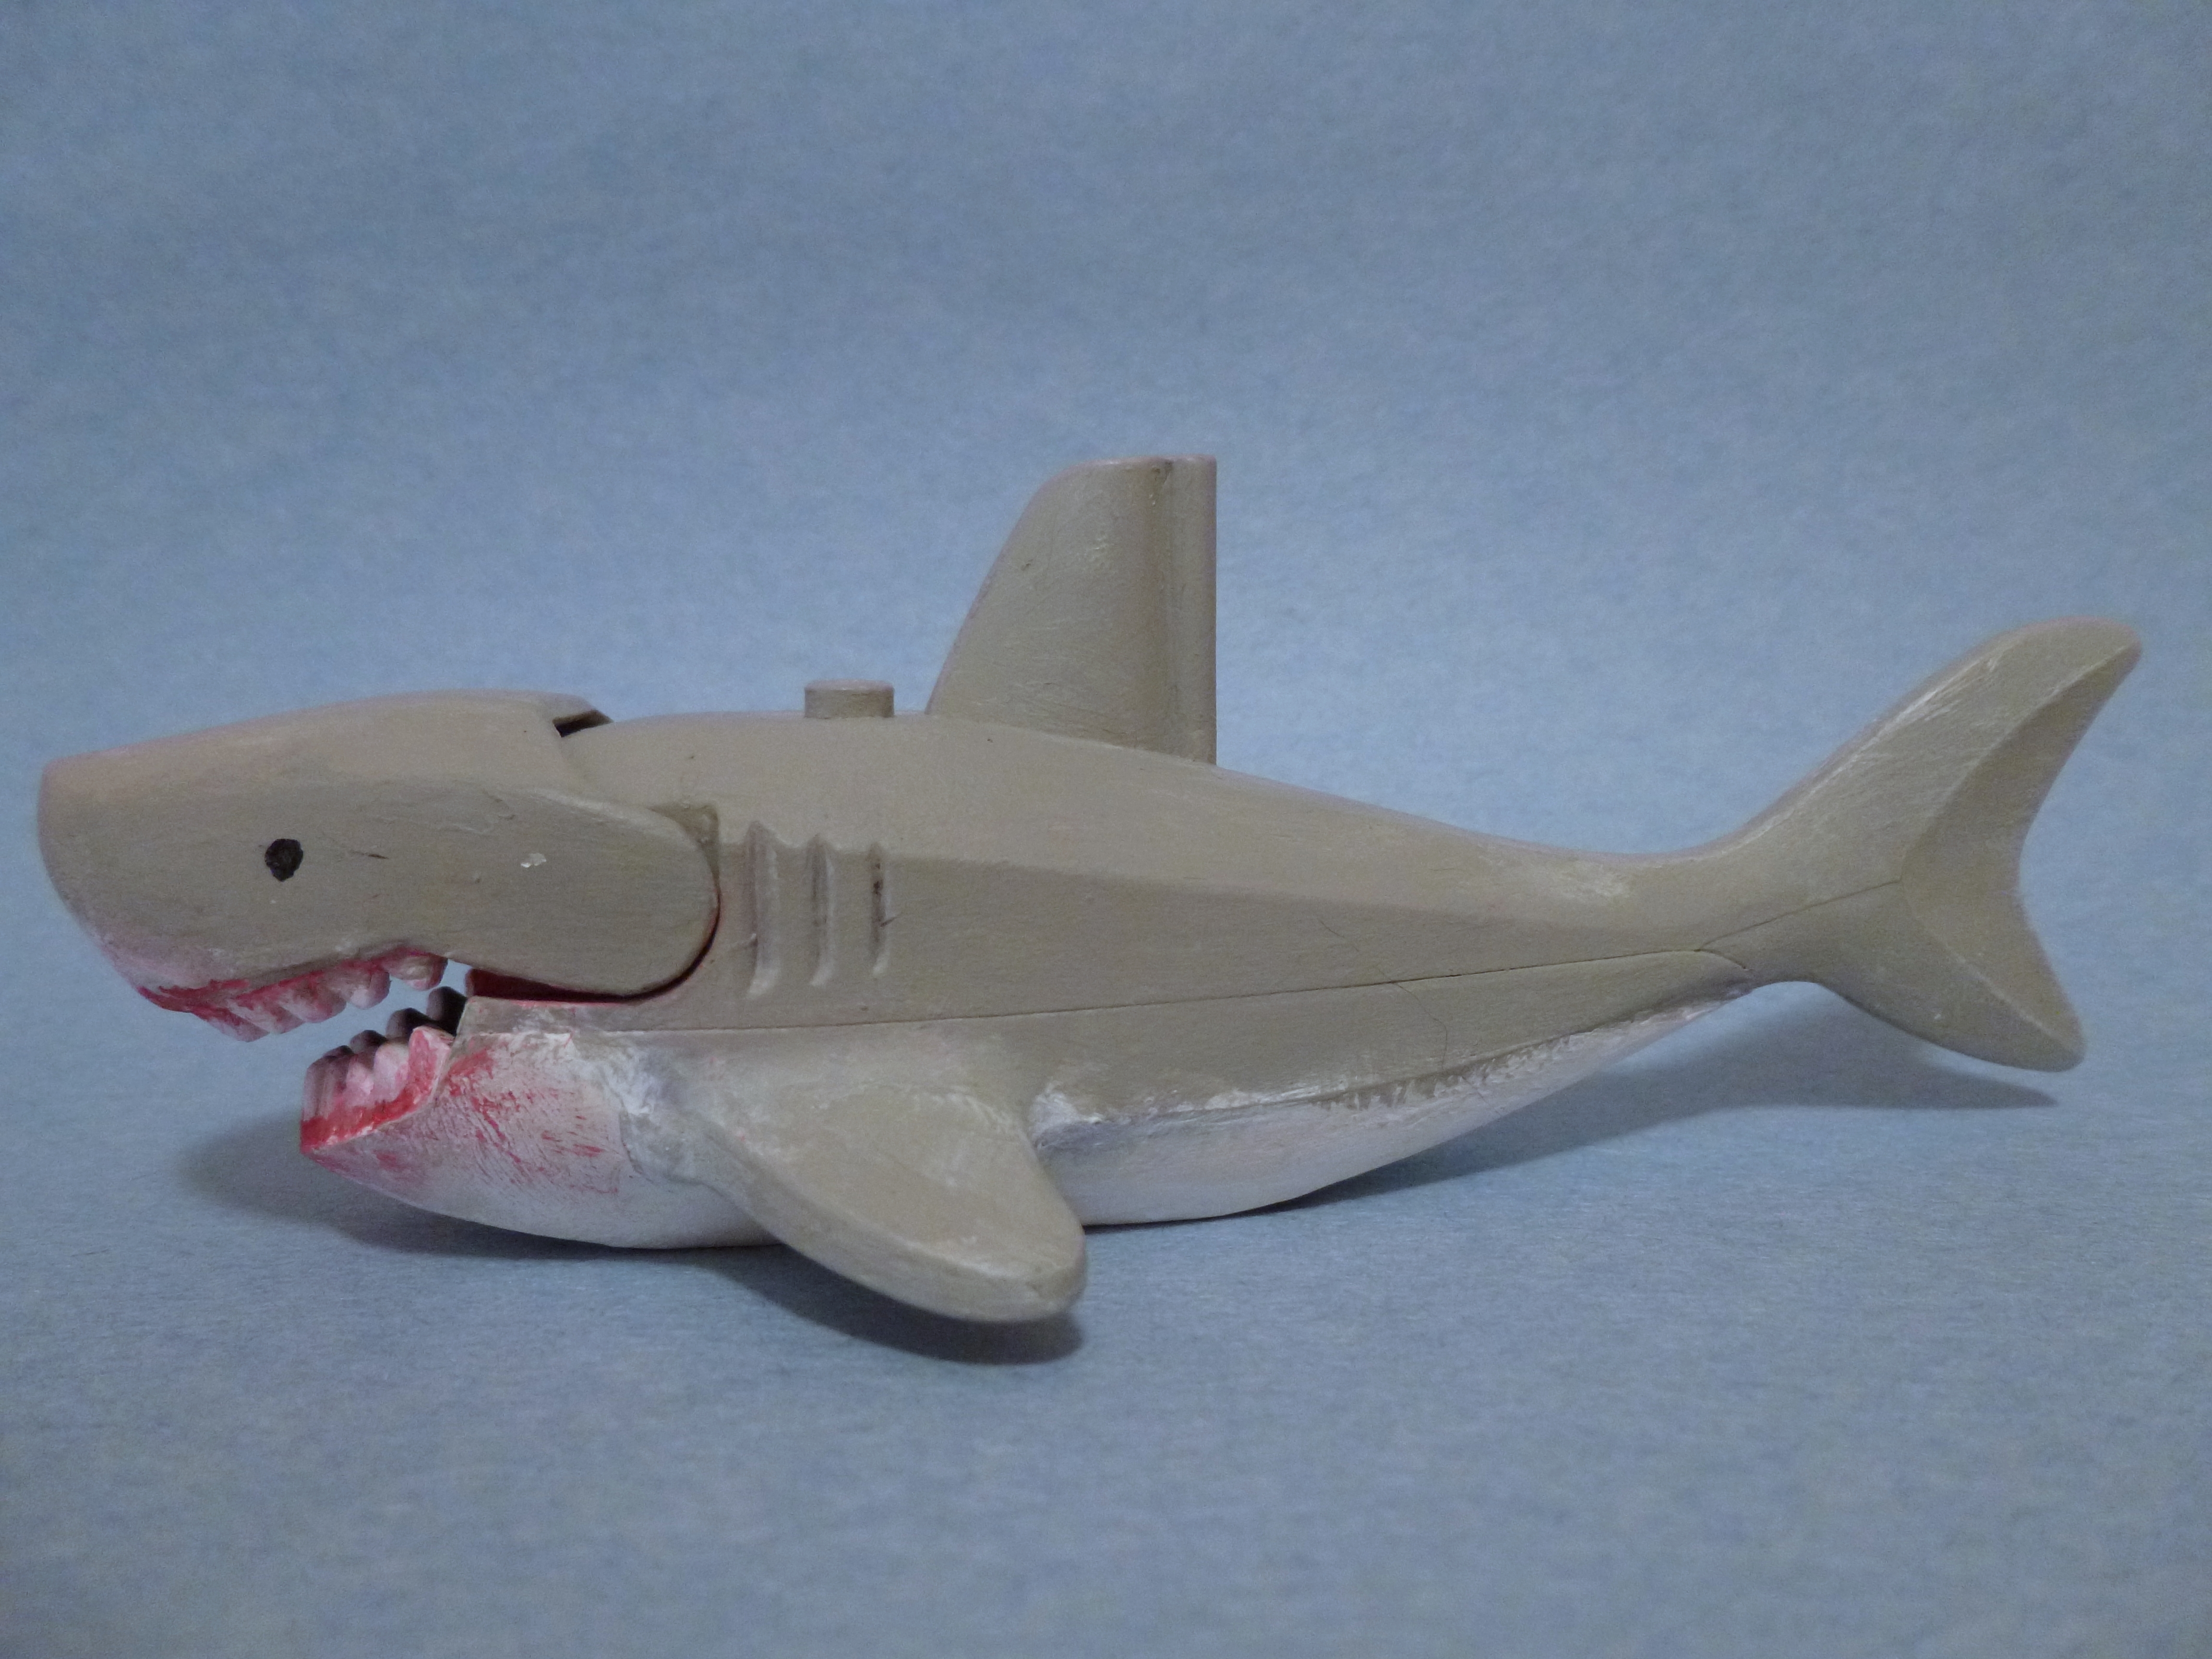 All sizes, Lego Jaws: Bruce The Shark